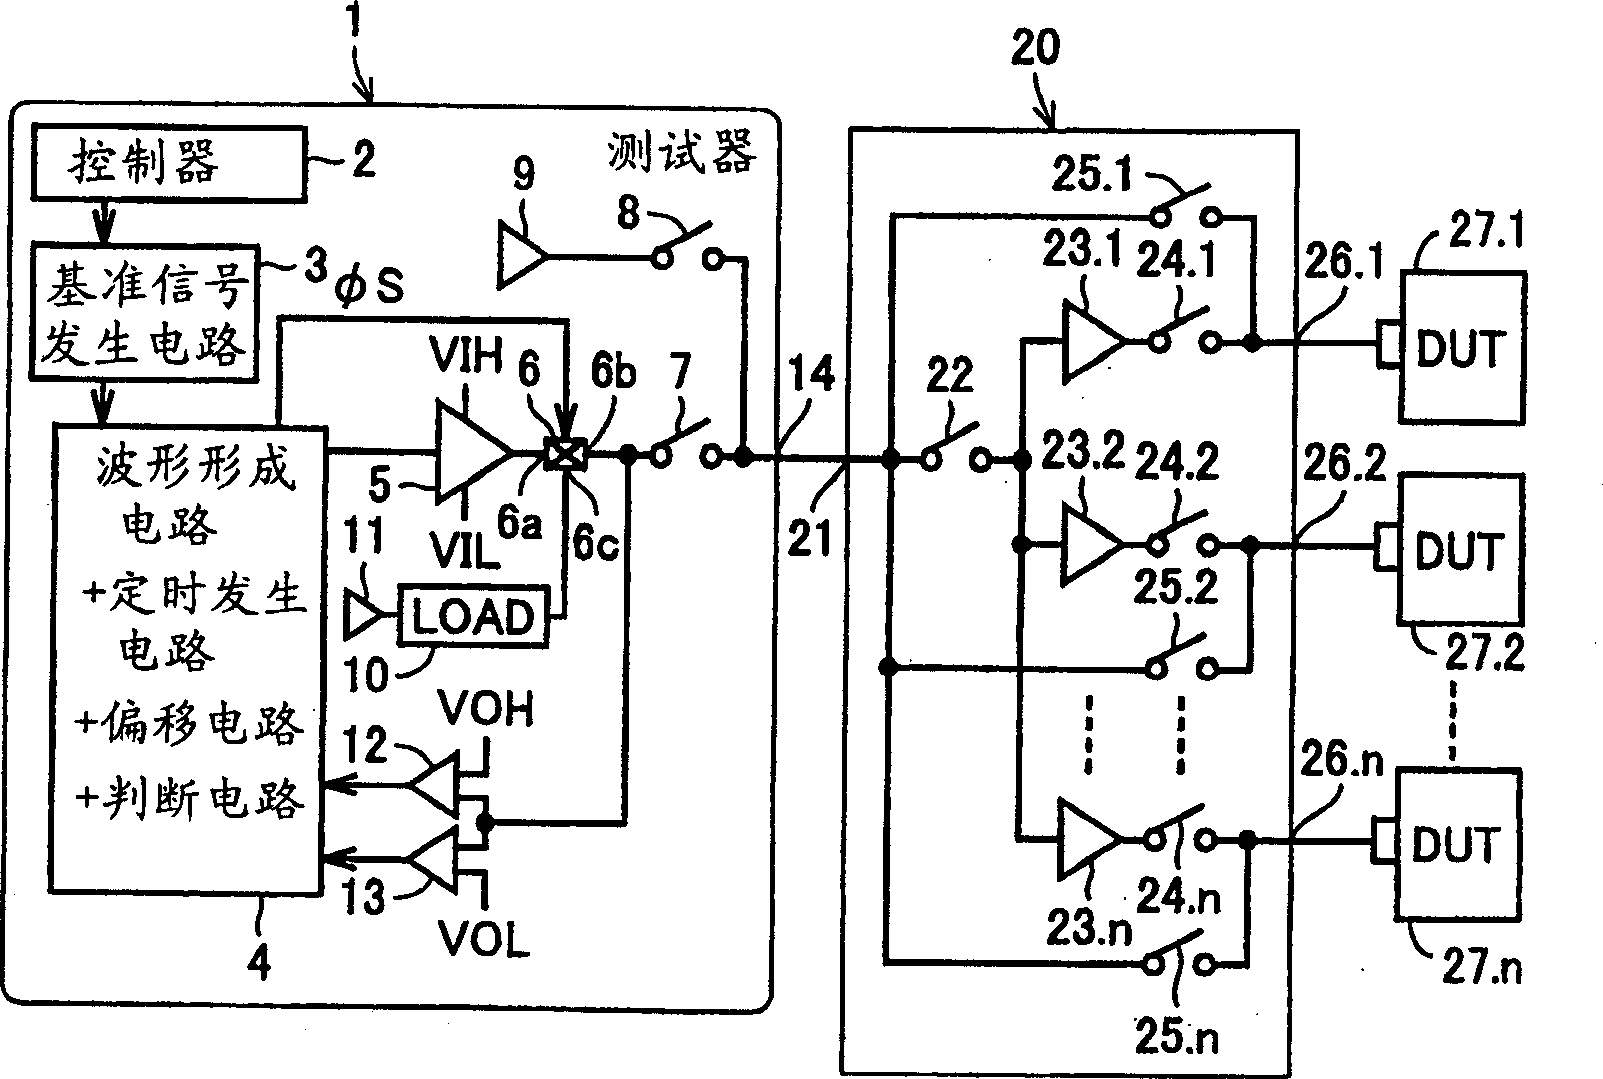 Coupling semiconductor testing device and interface circuit of the semiconductor device to be tested